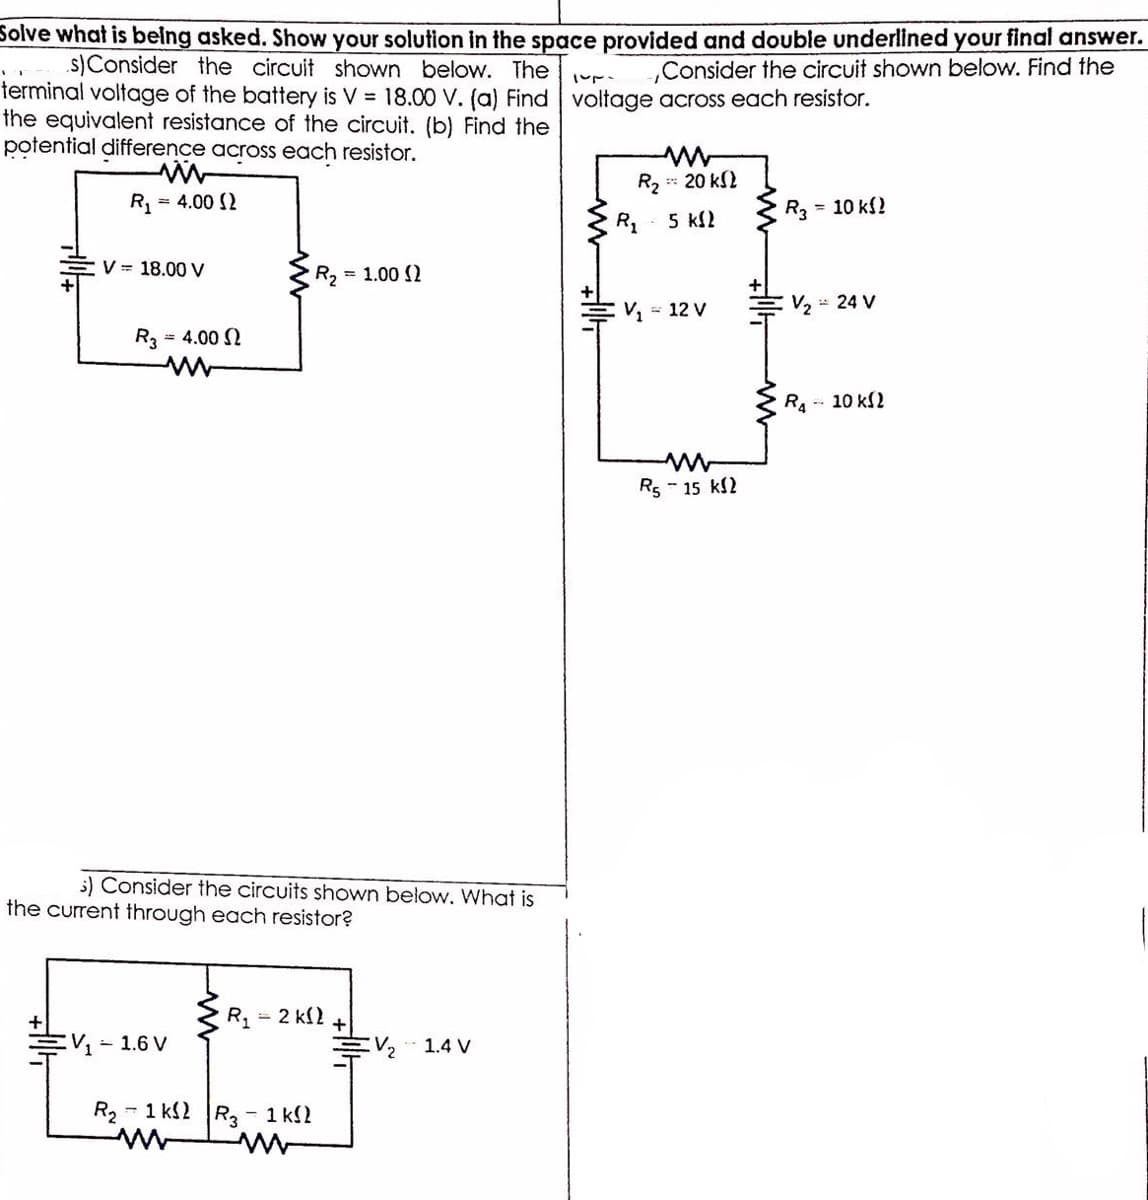 Solve what is belng asked. Show your solution in the space provided and double underlined your final answer.
.s)Consider the circuit shown below. The
terminal voltage of the battery is V = 18.00 V. (a) Find voltage across each resistor.
the equivalent resistance of the circuit. (b) Find the
potential difference across each resistor.
Consider the circuit shown below. Find the
R2 20 kS2
R1
= 4.00 2
R3
= 10 kf?
5 kl2
V = 18.00 V
R, = 1.00 ()
V, = 12 V
V, = 24 V
R3 = 4.00 2
R.-- 10 kl2
Rs - 15 kl2
5) Consider the circuits shown below. What is
the current through each resistor?
R = 2 kl2
こV」
- 1.6 V
V2
1.4 V
R2 - 1 k2
R3-1 k2
